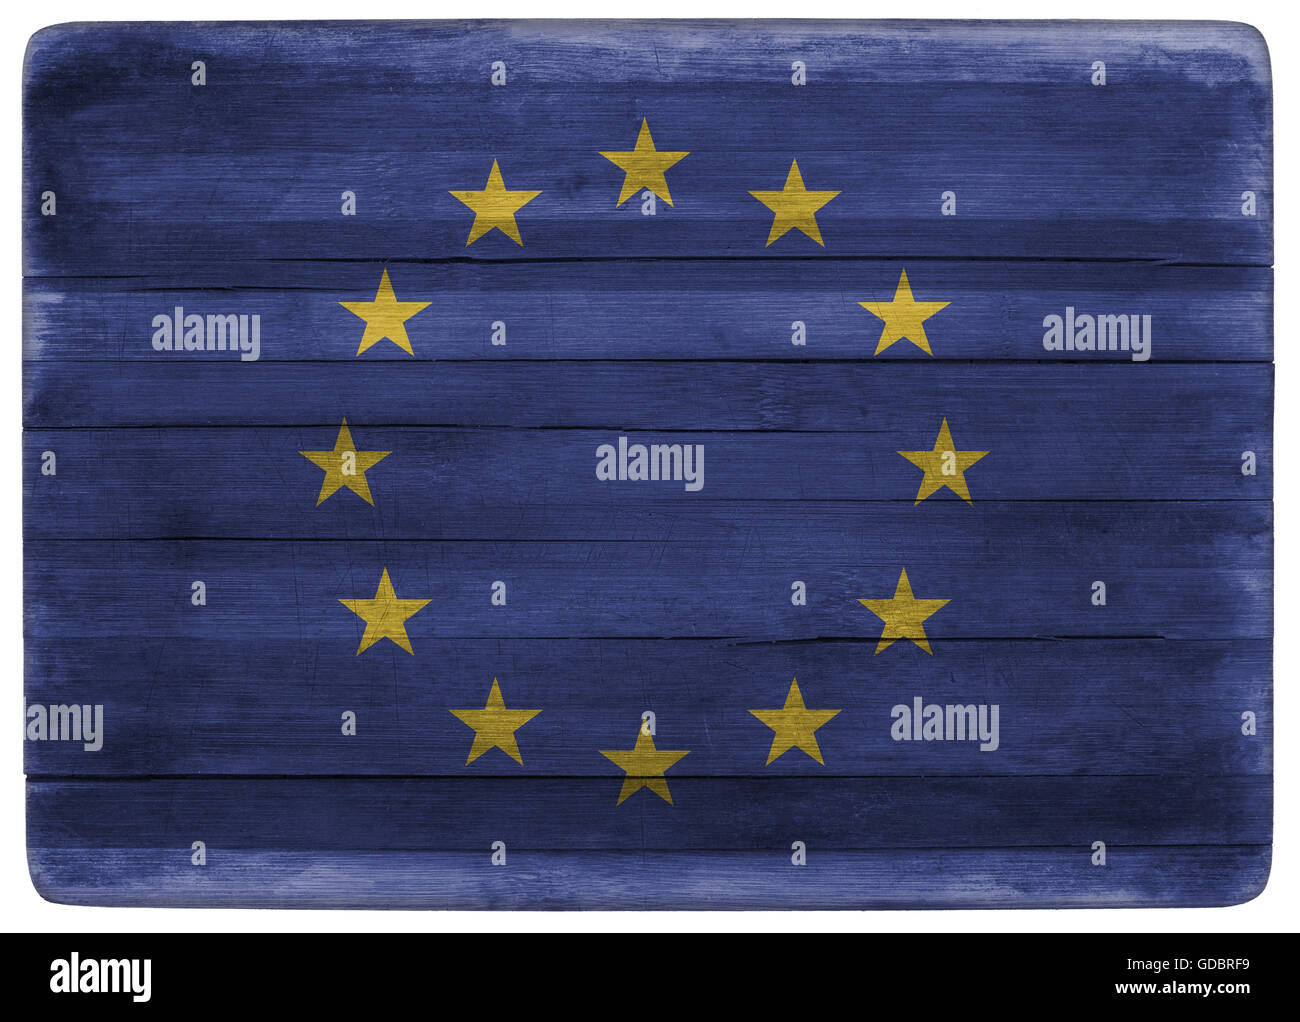 horizontal front view 3d illustration of an European Union flag on wooden textured cooking board Stock Photo